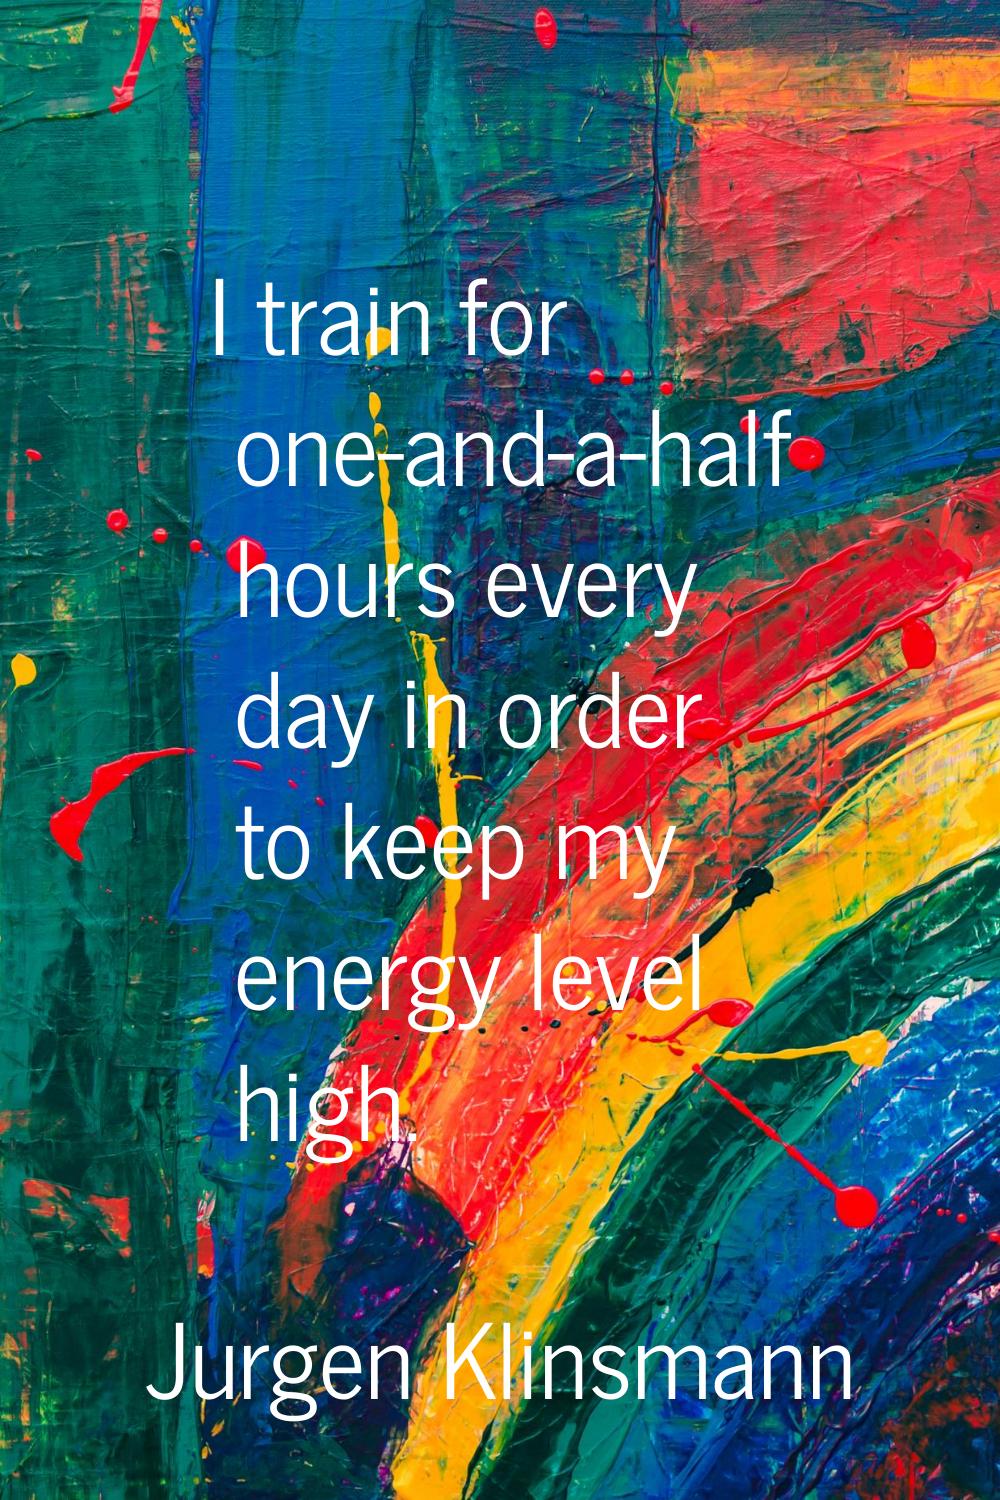 I train for one-and-a-half hours every day in order to keep my energy level high.